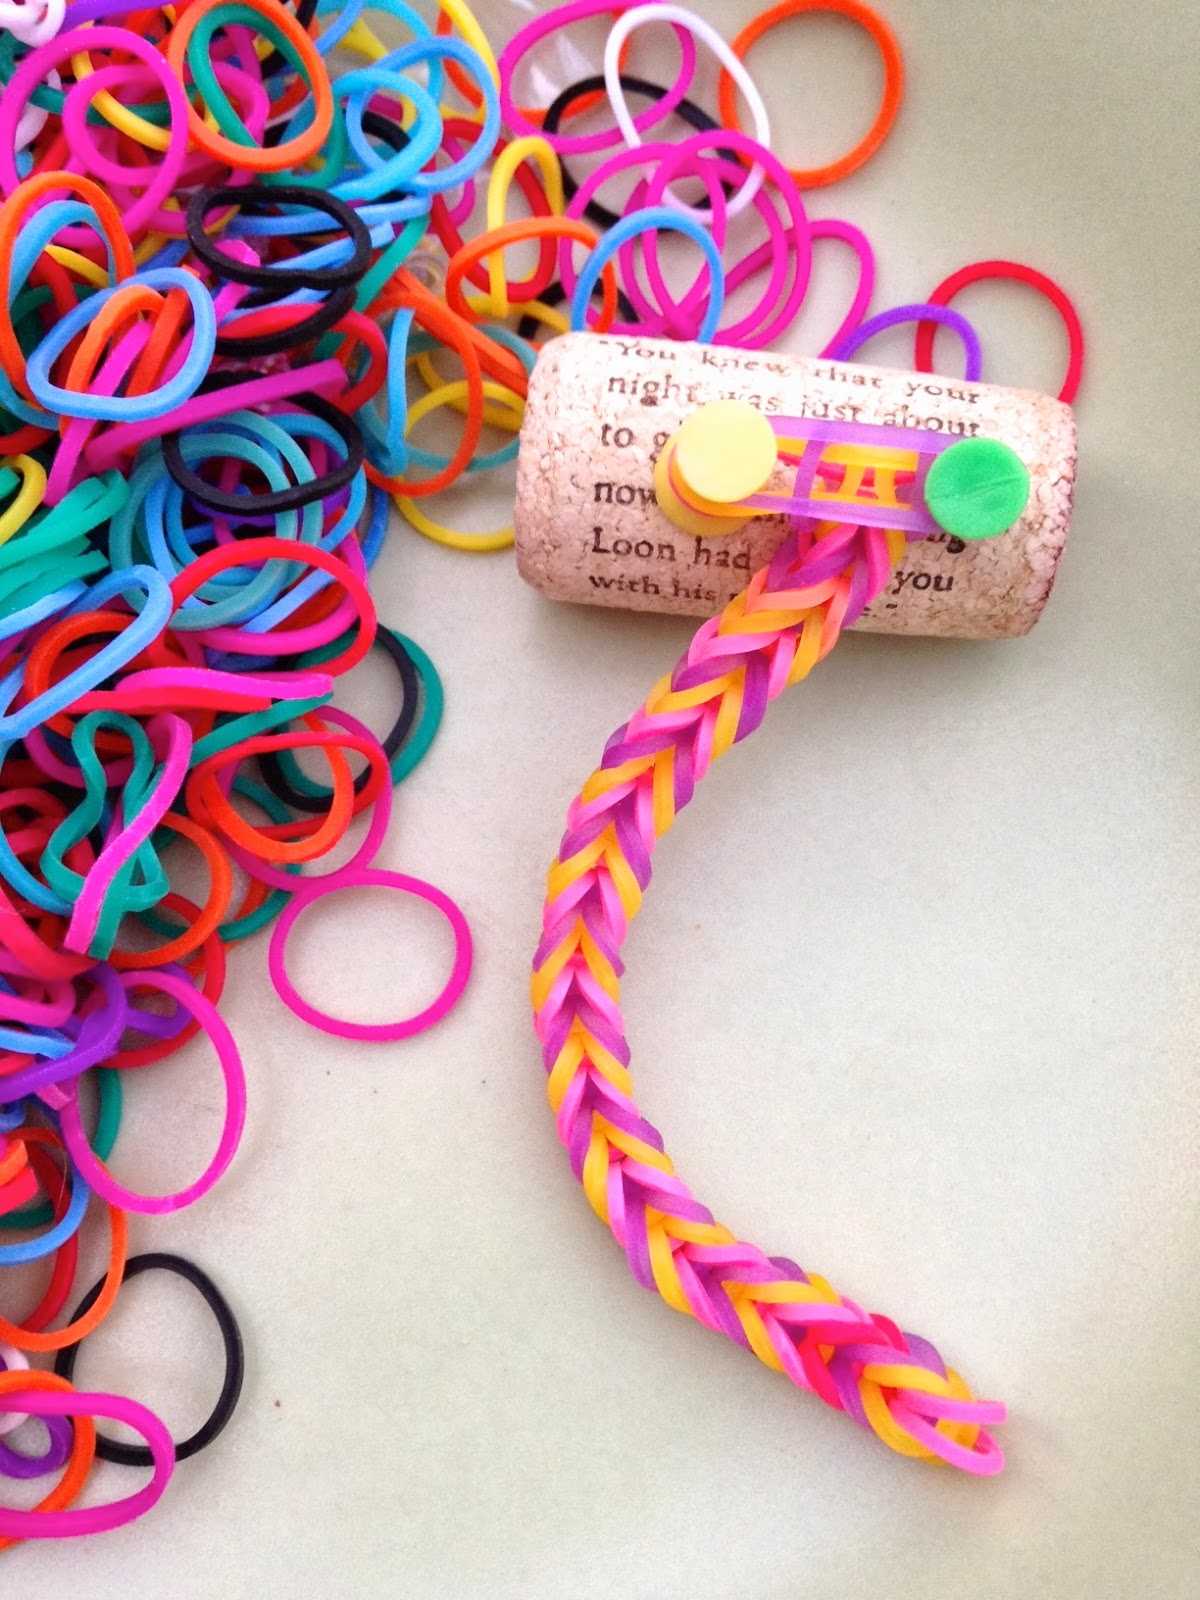 Rubber Band Bracelet  How To Make A Colorful Bracelet With Rubber